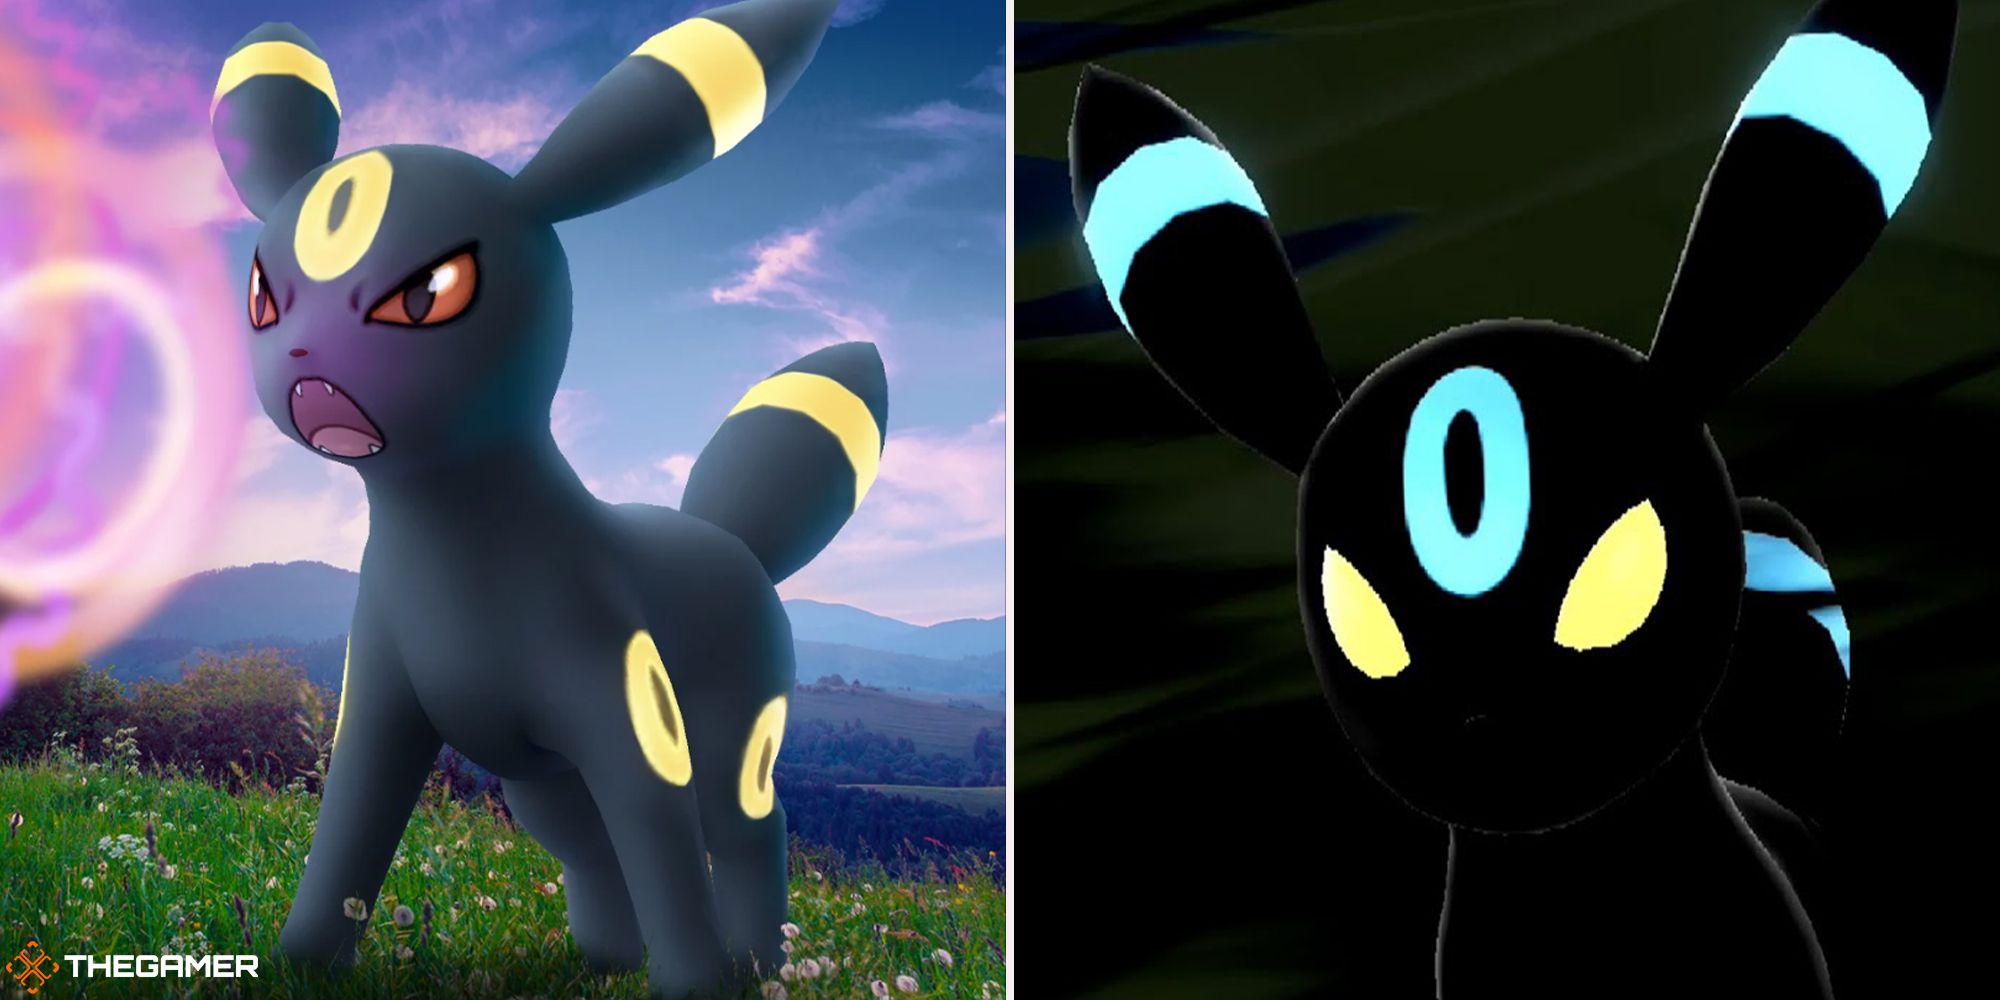 Shiny Umbreon's silhouette on the right with a regular Umbreon growling on the left.